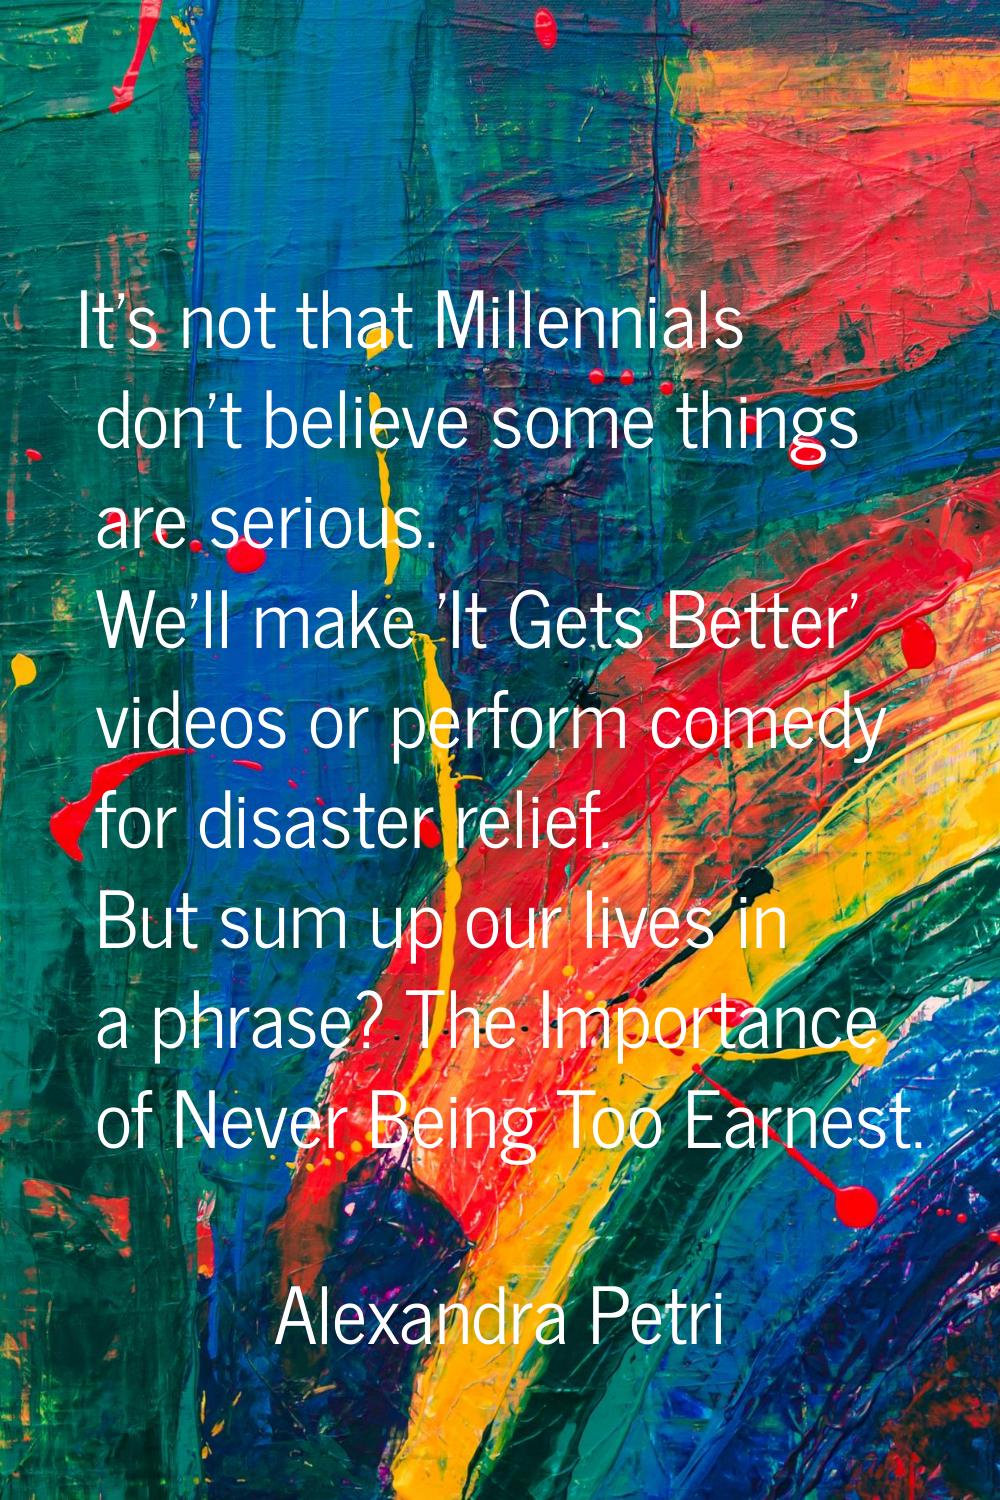 It's not that Millennials don't believe some things are serious. We'll make 'It Gets Better' videos